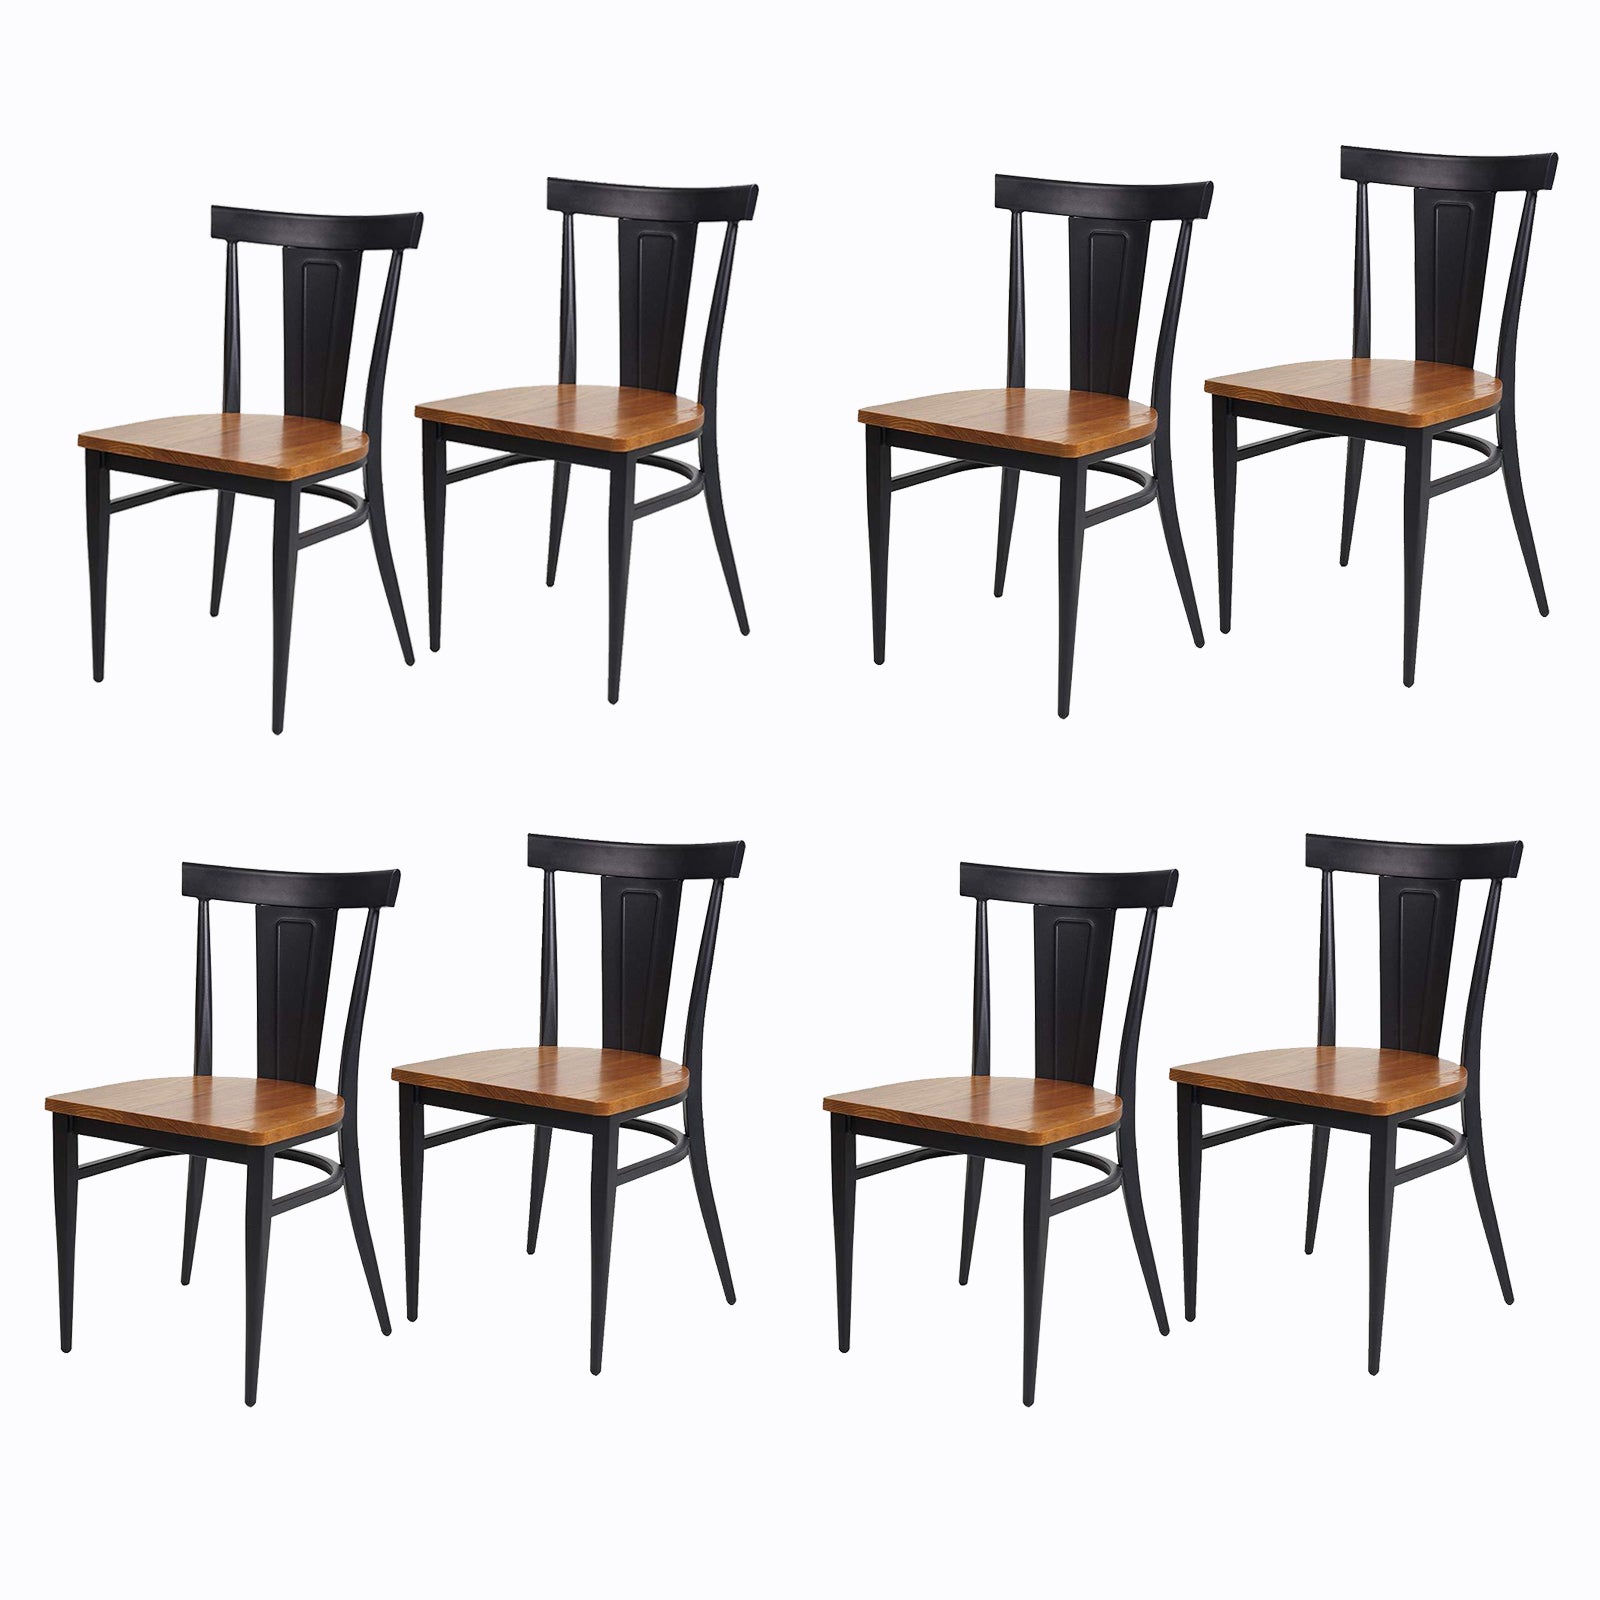 Heavy Duty Dining Chairs Set of 8 with Wood Seat and Metal Frame Restaurant Chairs for Commercial and Residential Use